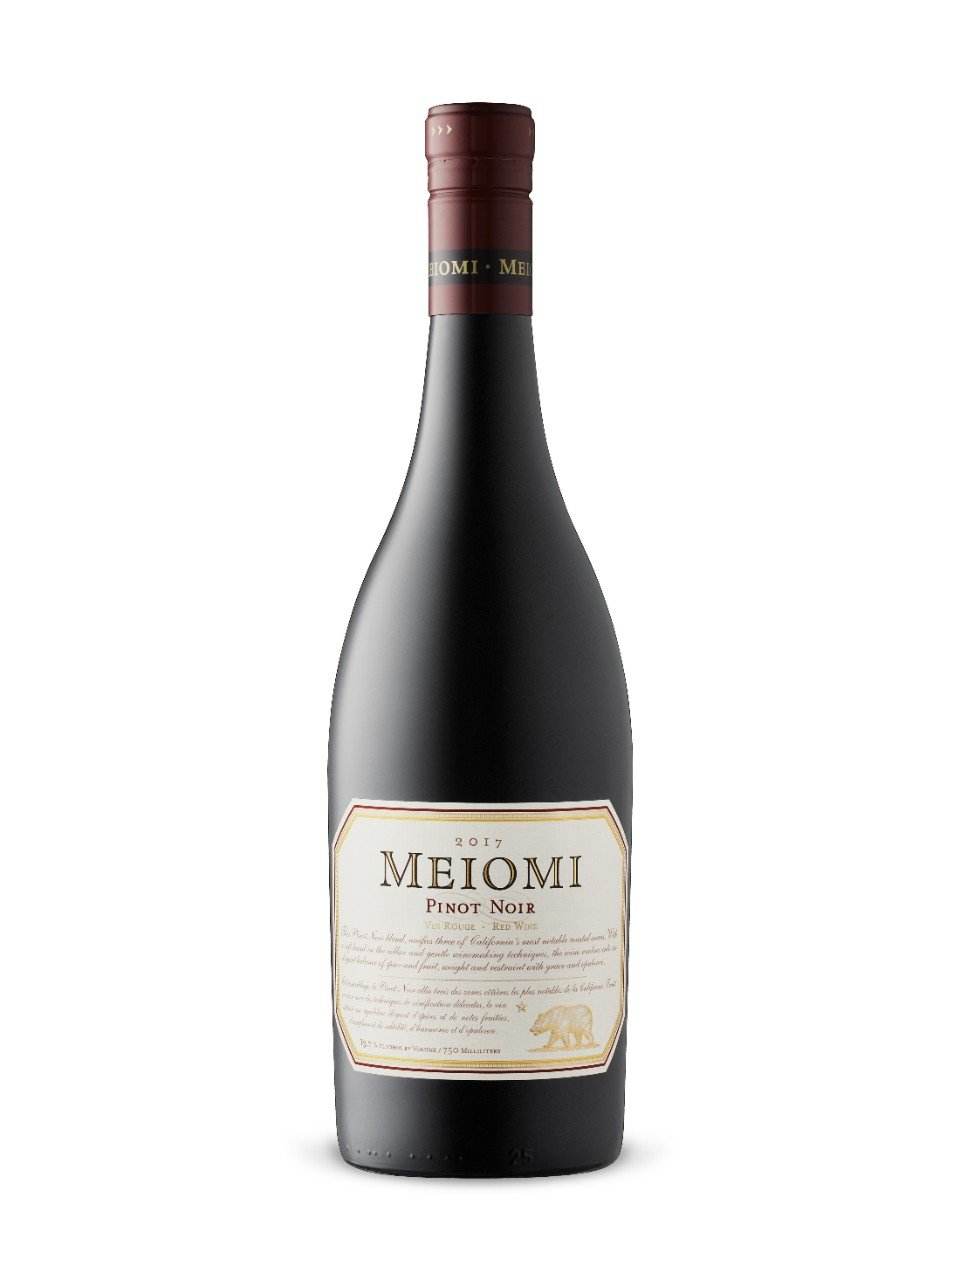 Meiomi Pinot Noir | Exquisite Wine & Alcohol Gift Delivery Toronto Canada | Vyno